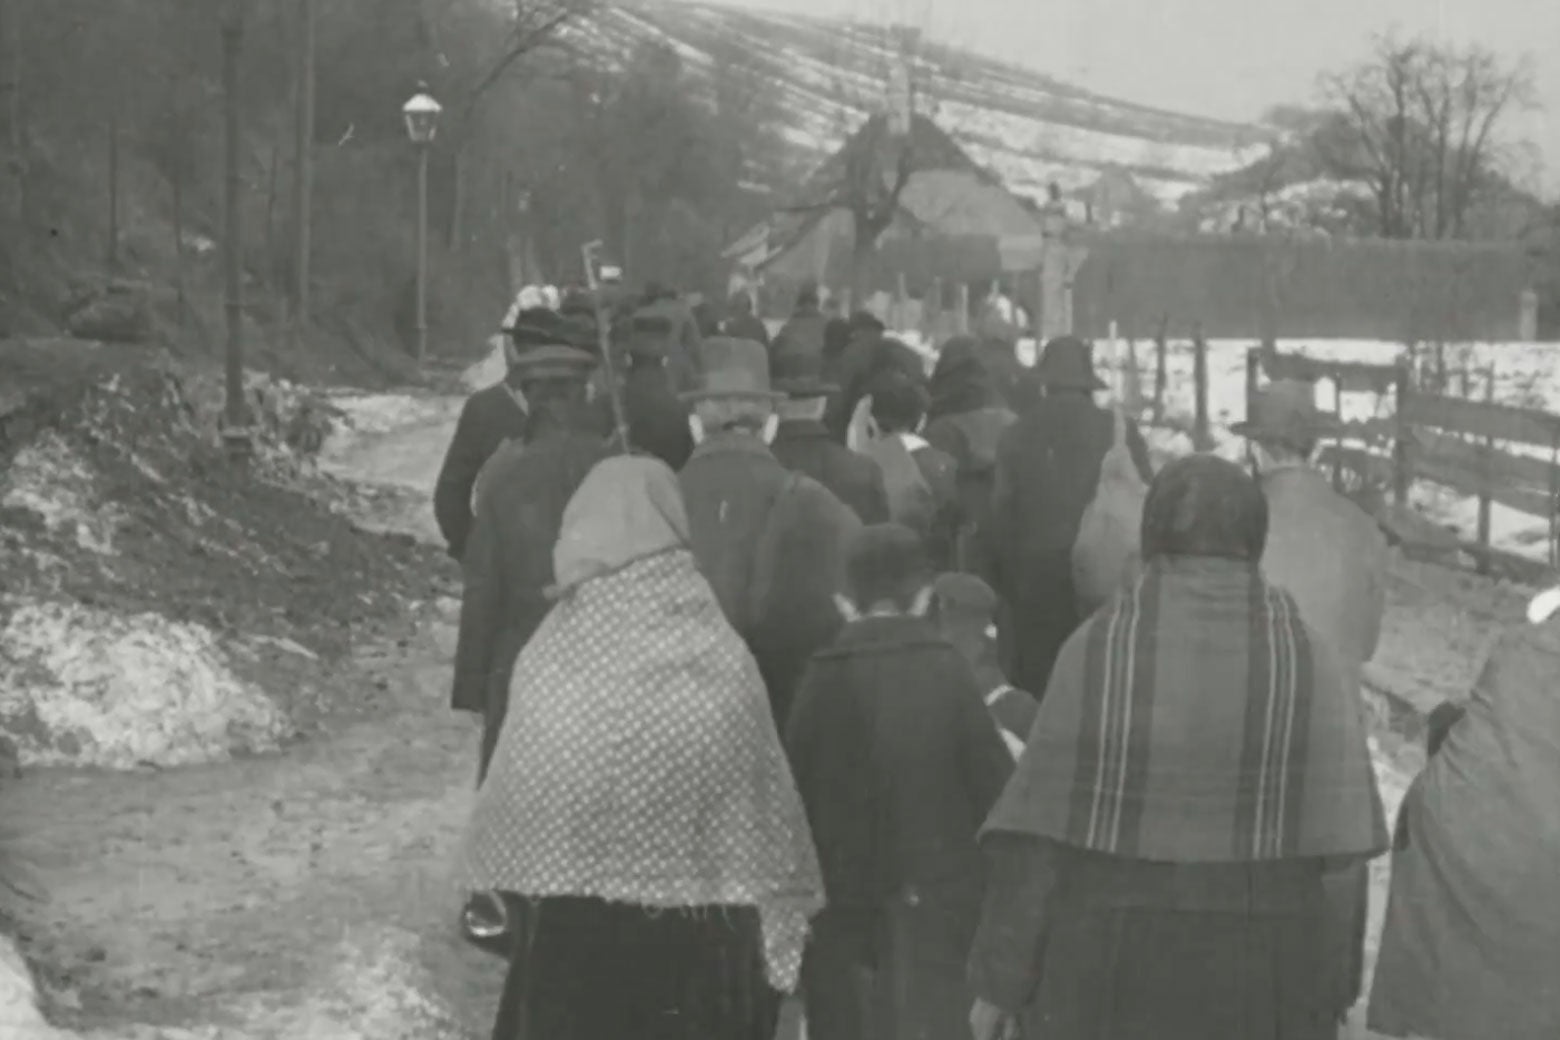 A still image from The City Without Jews.